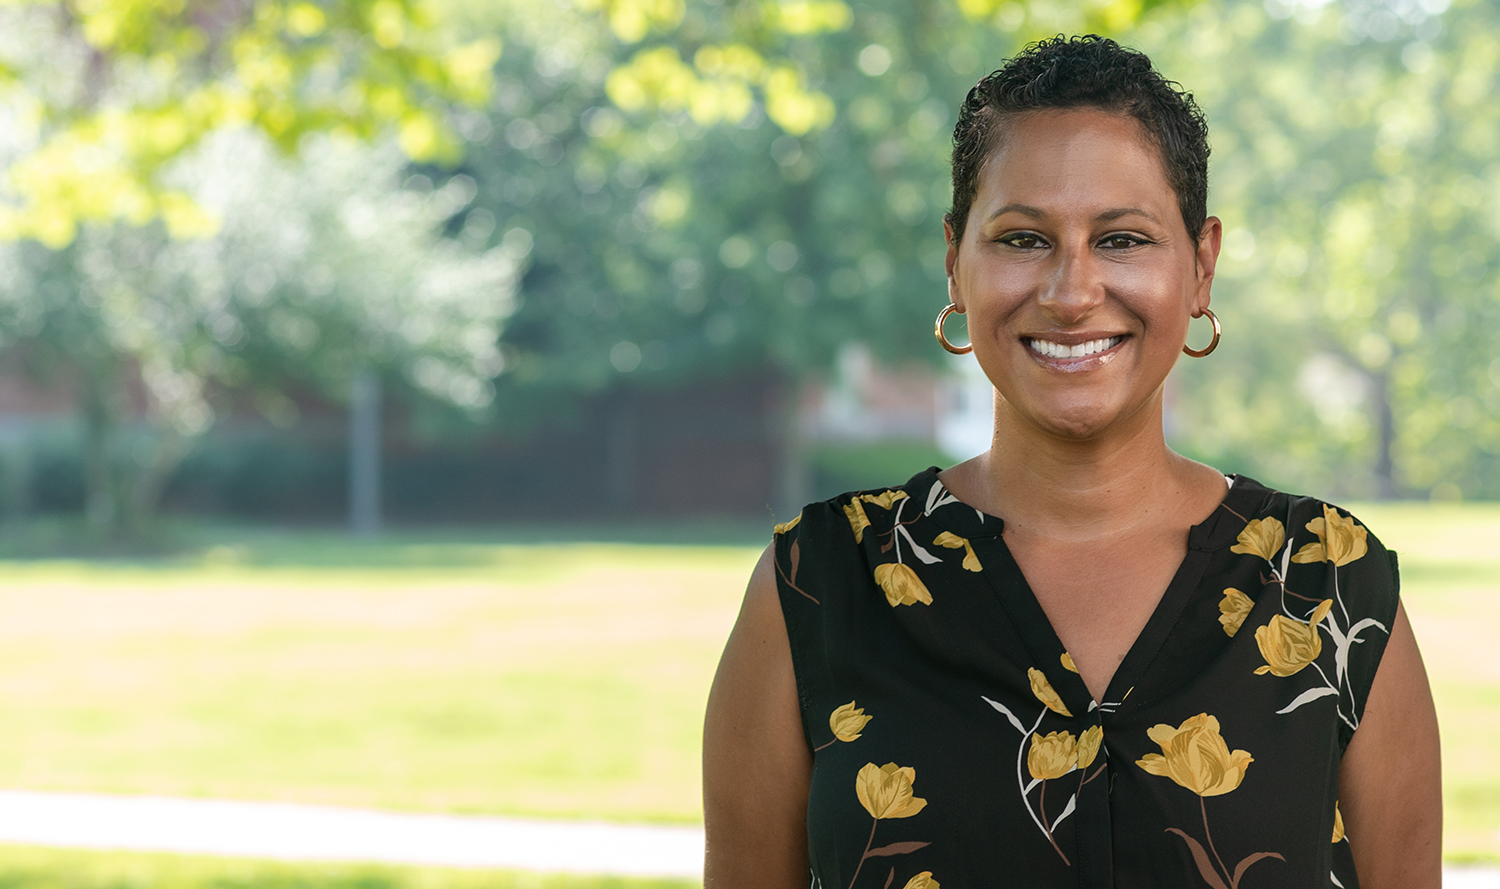 Transylvania alumna reflects on her role in Commission for Racial Justice and Equality